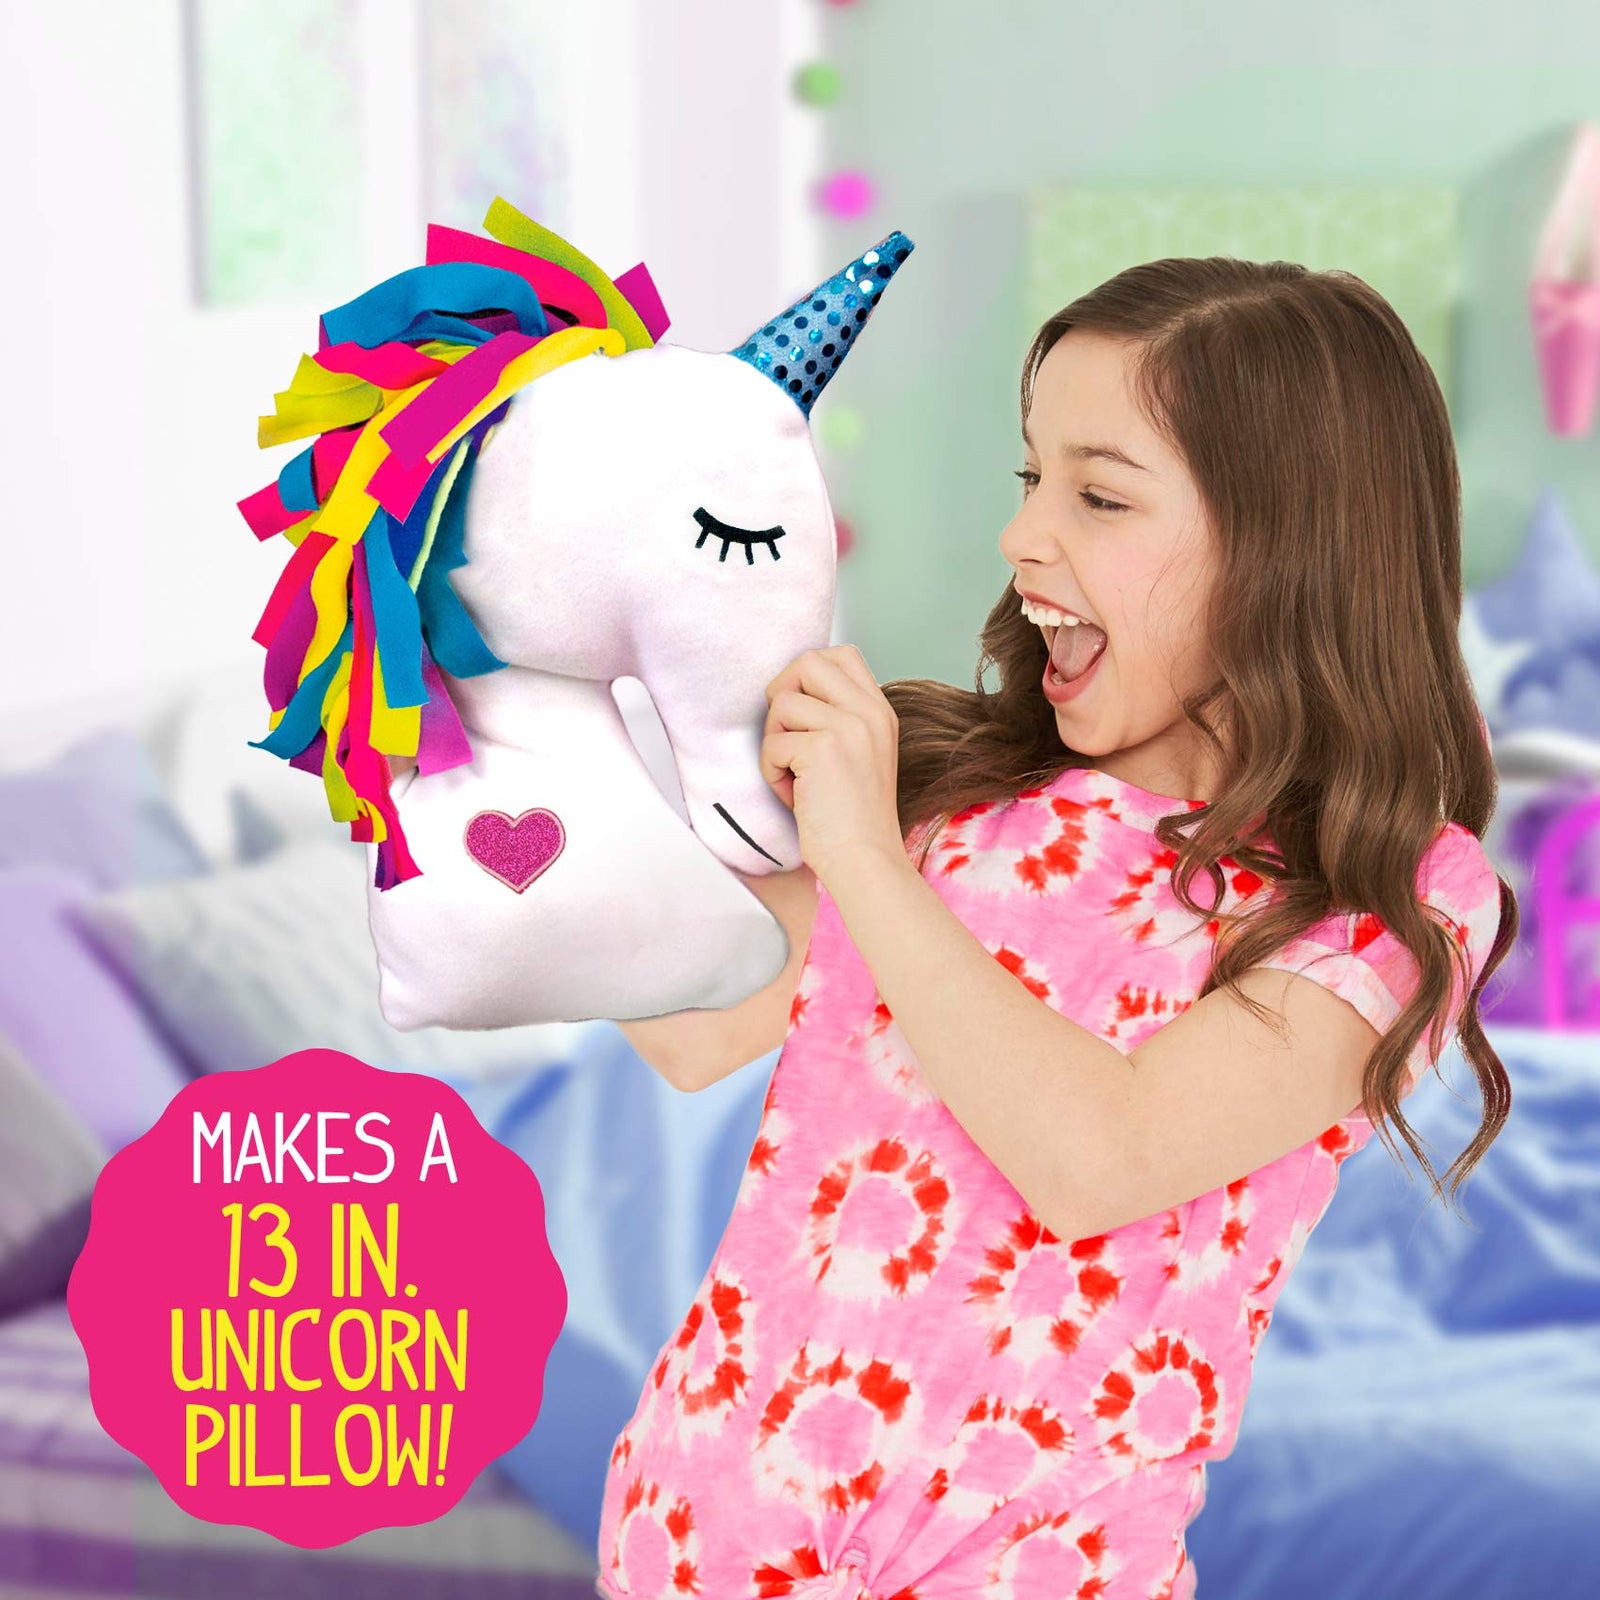 Made By Me Make Your Own Unicorn Pillow by Horizon Group USA, Unicorn Shaped DIY Decorative Pillow. Fiberfill, Glitter Stickers & Rainbow Fleece Strips Included. No Sewing Needed